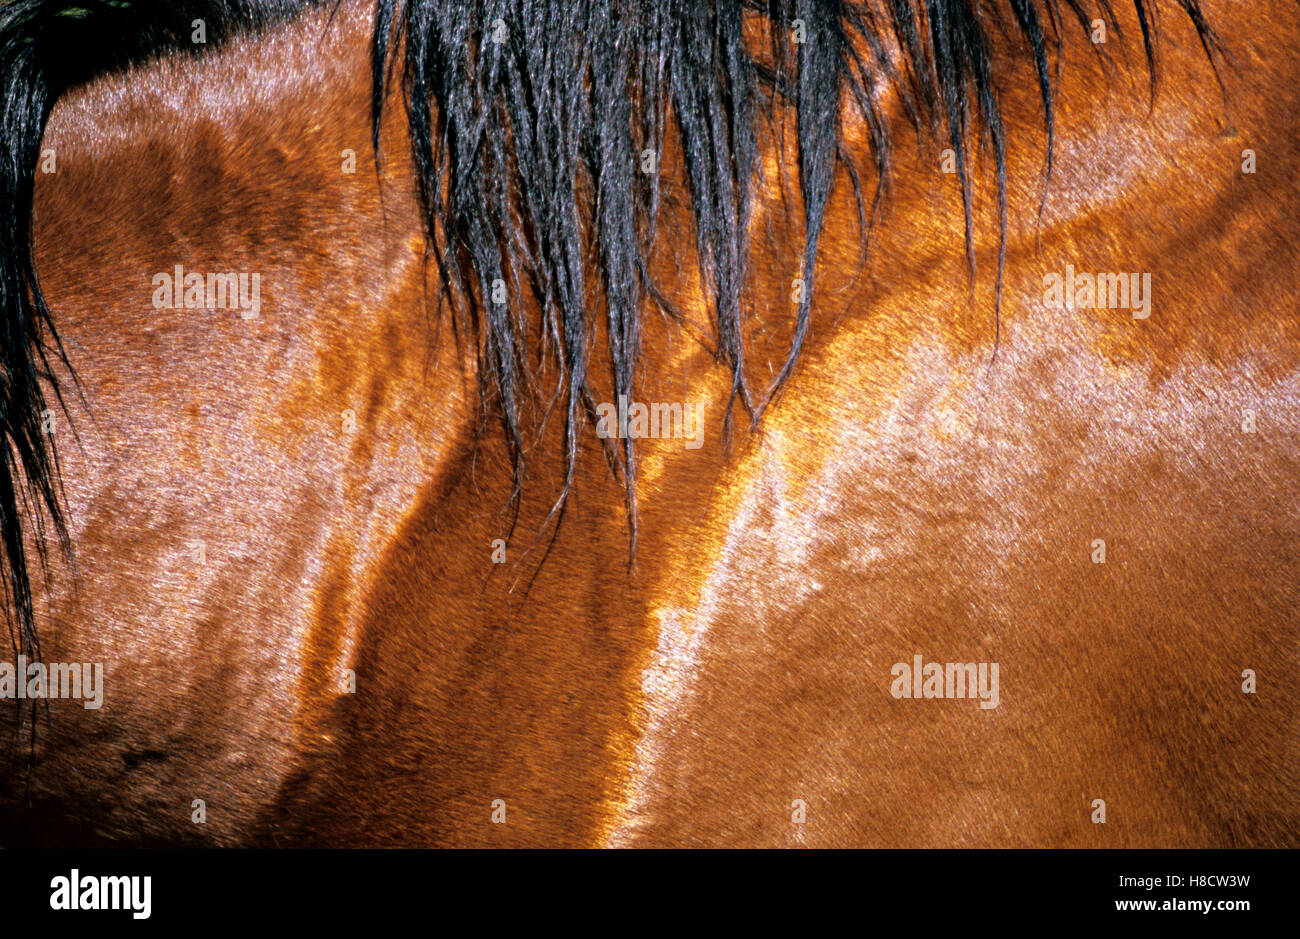 Horse skin and crest in closeup Stock Photo